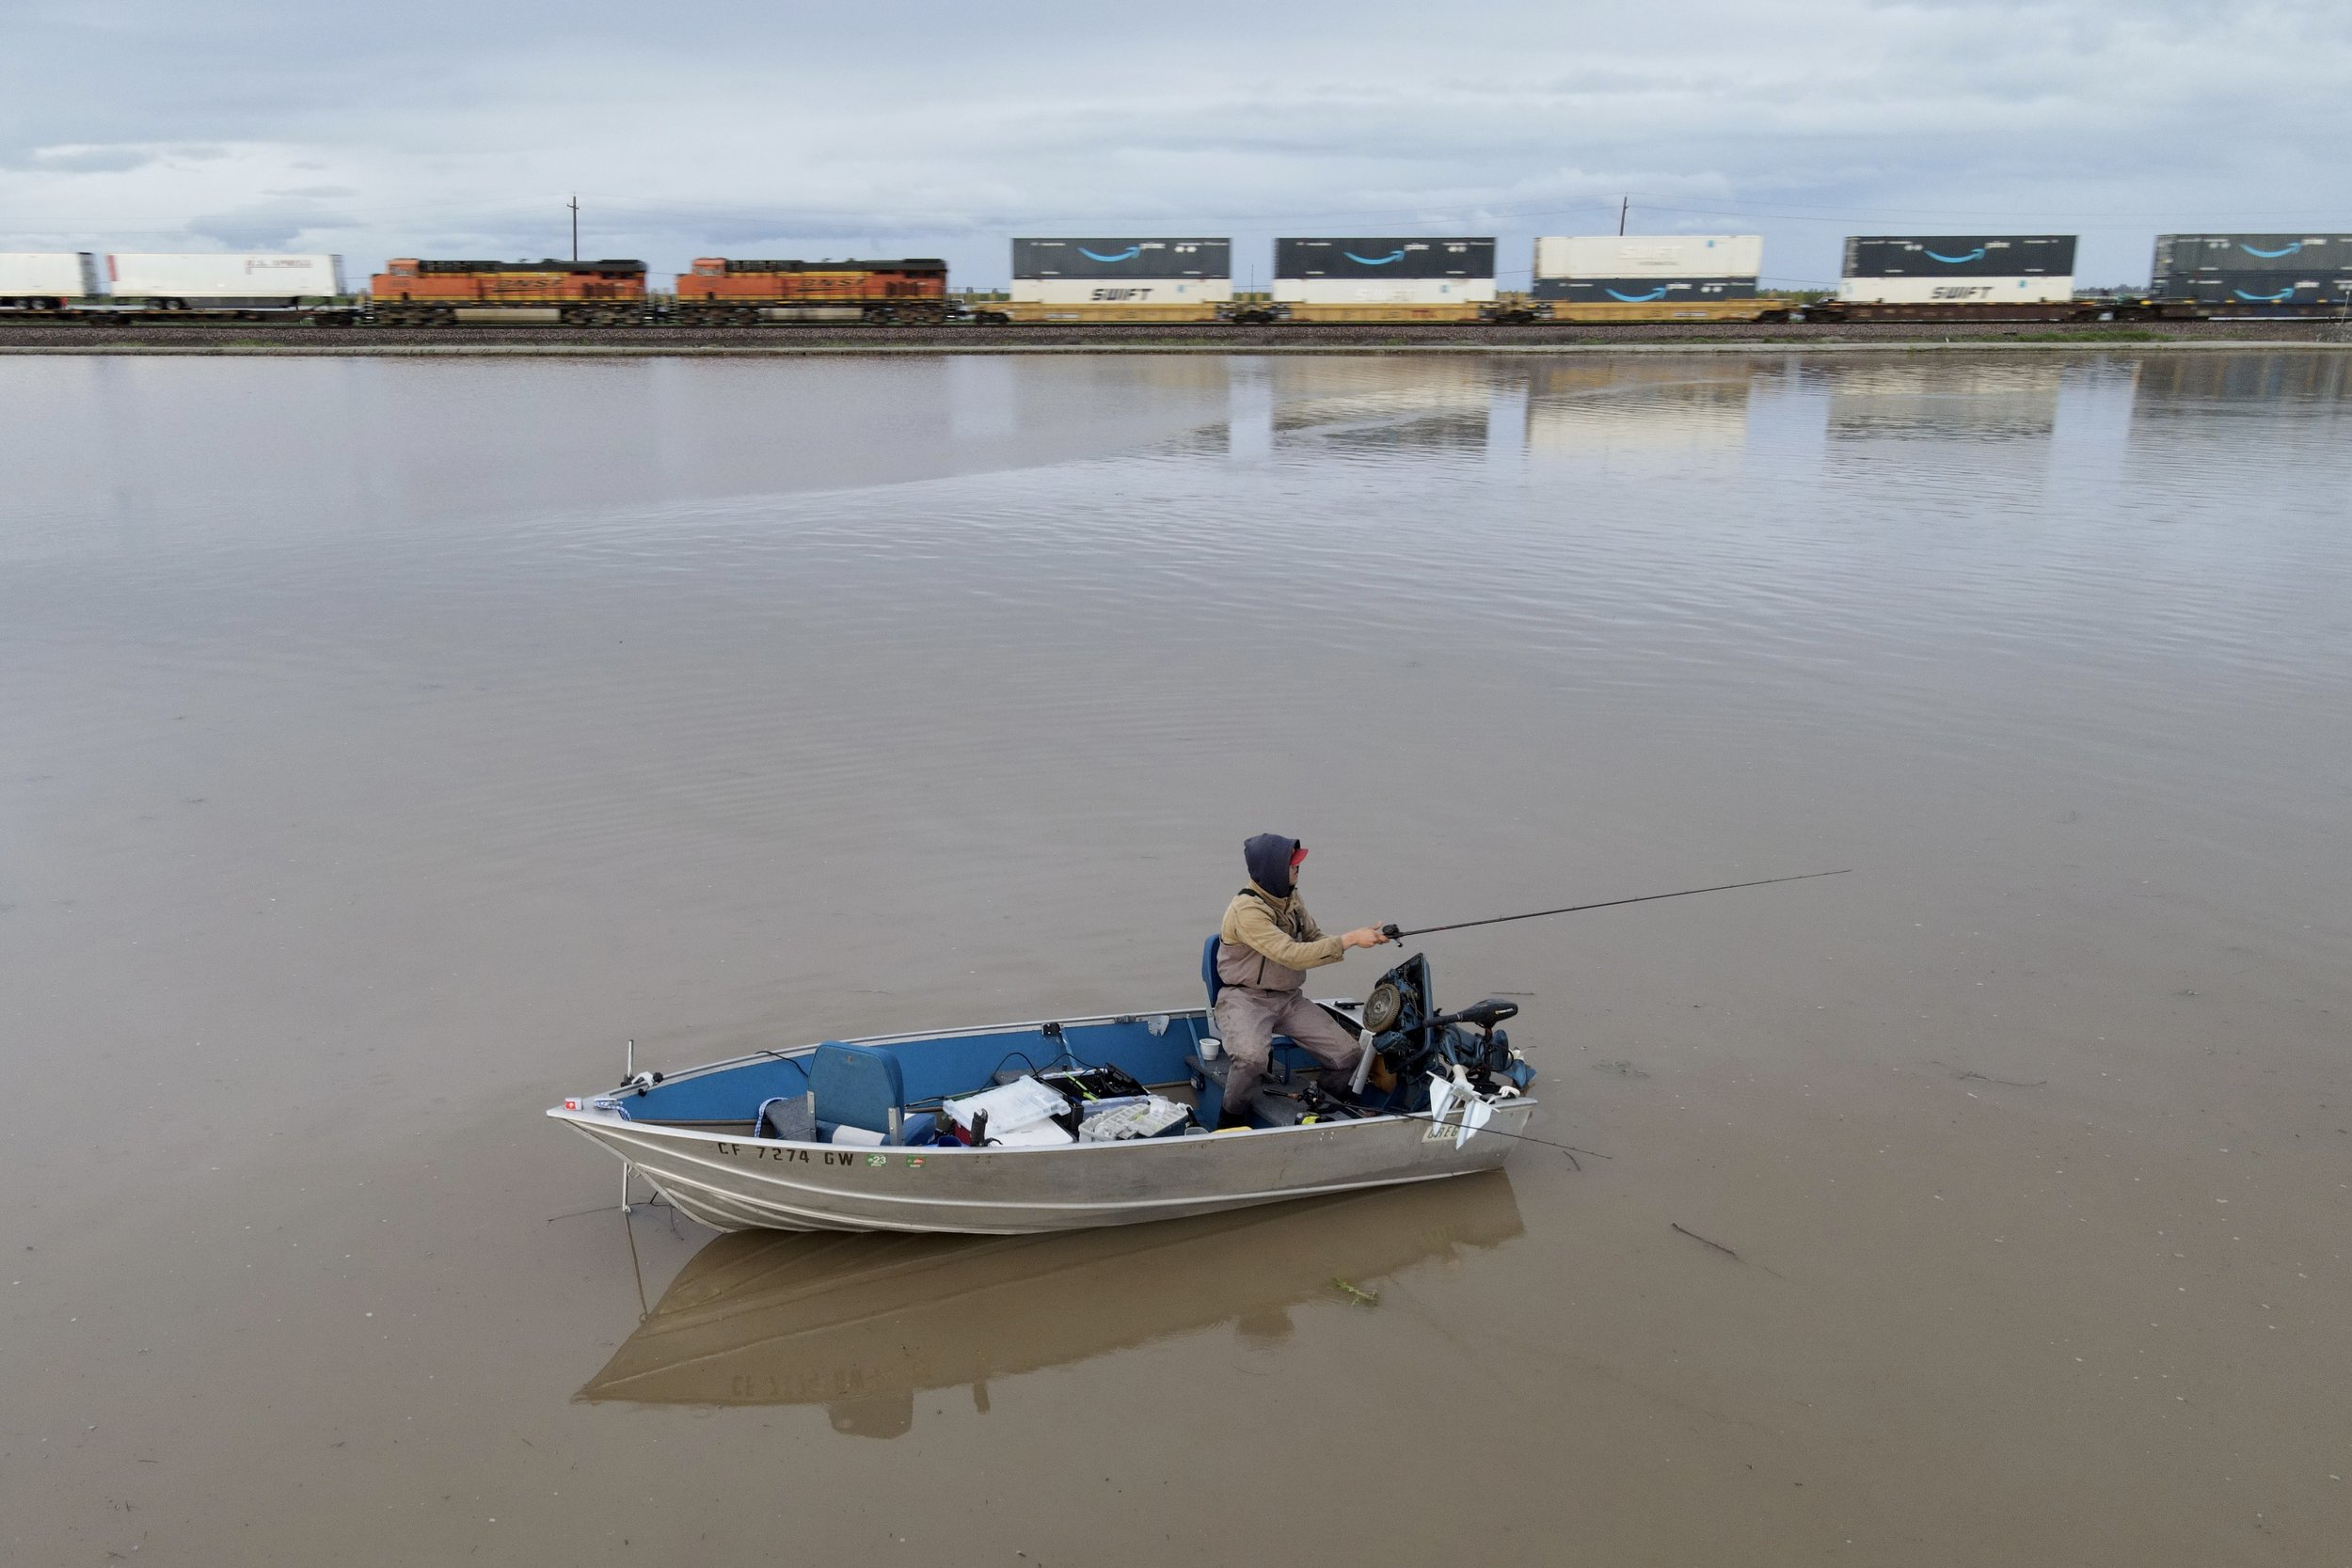  A man fishes in the floodwaters as a train passes after days of heavy rain in Corcoran, California, U.S., March 29, 2023.   